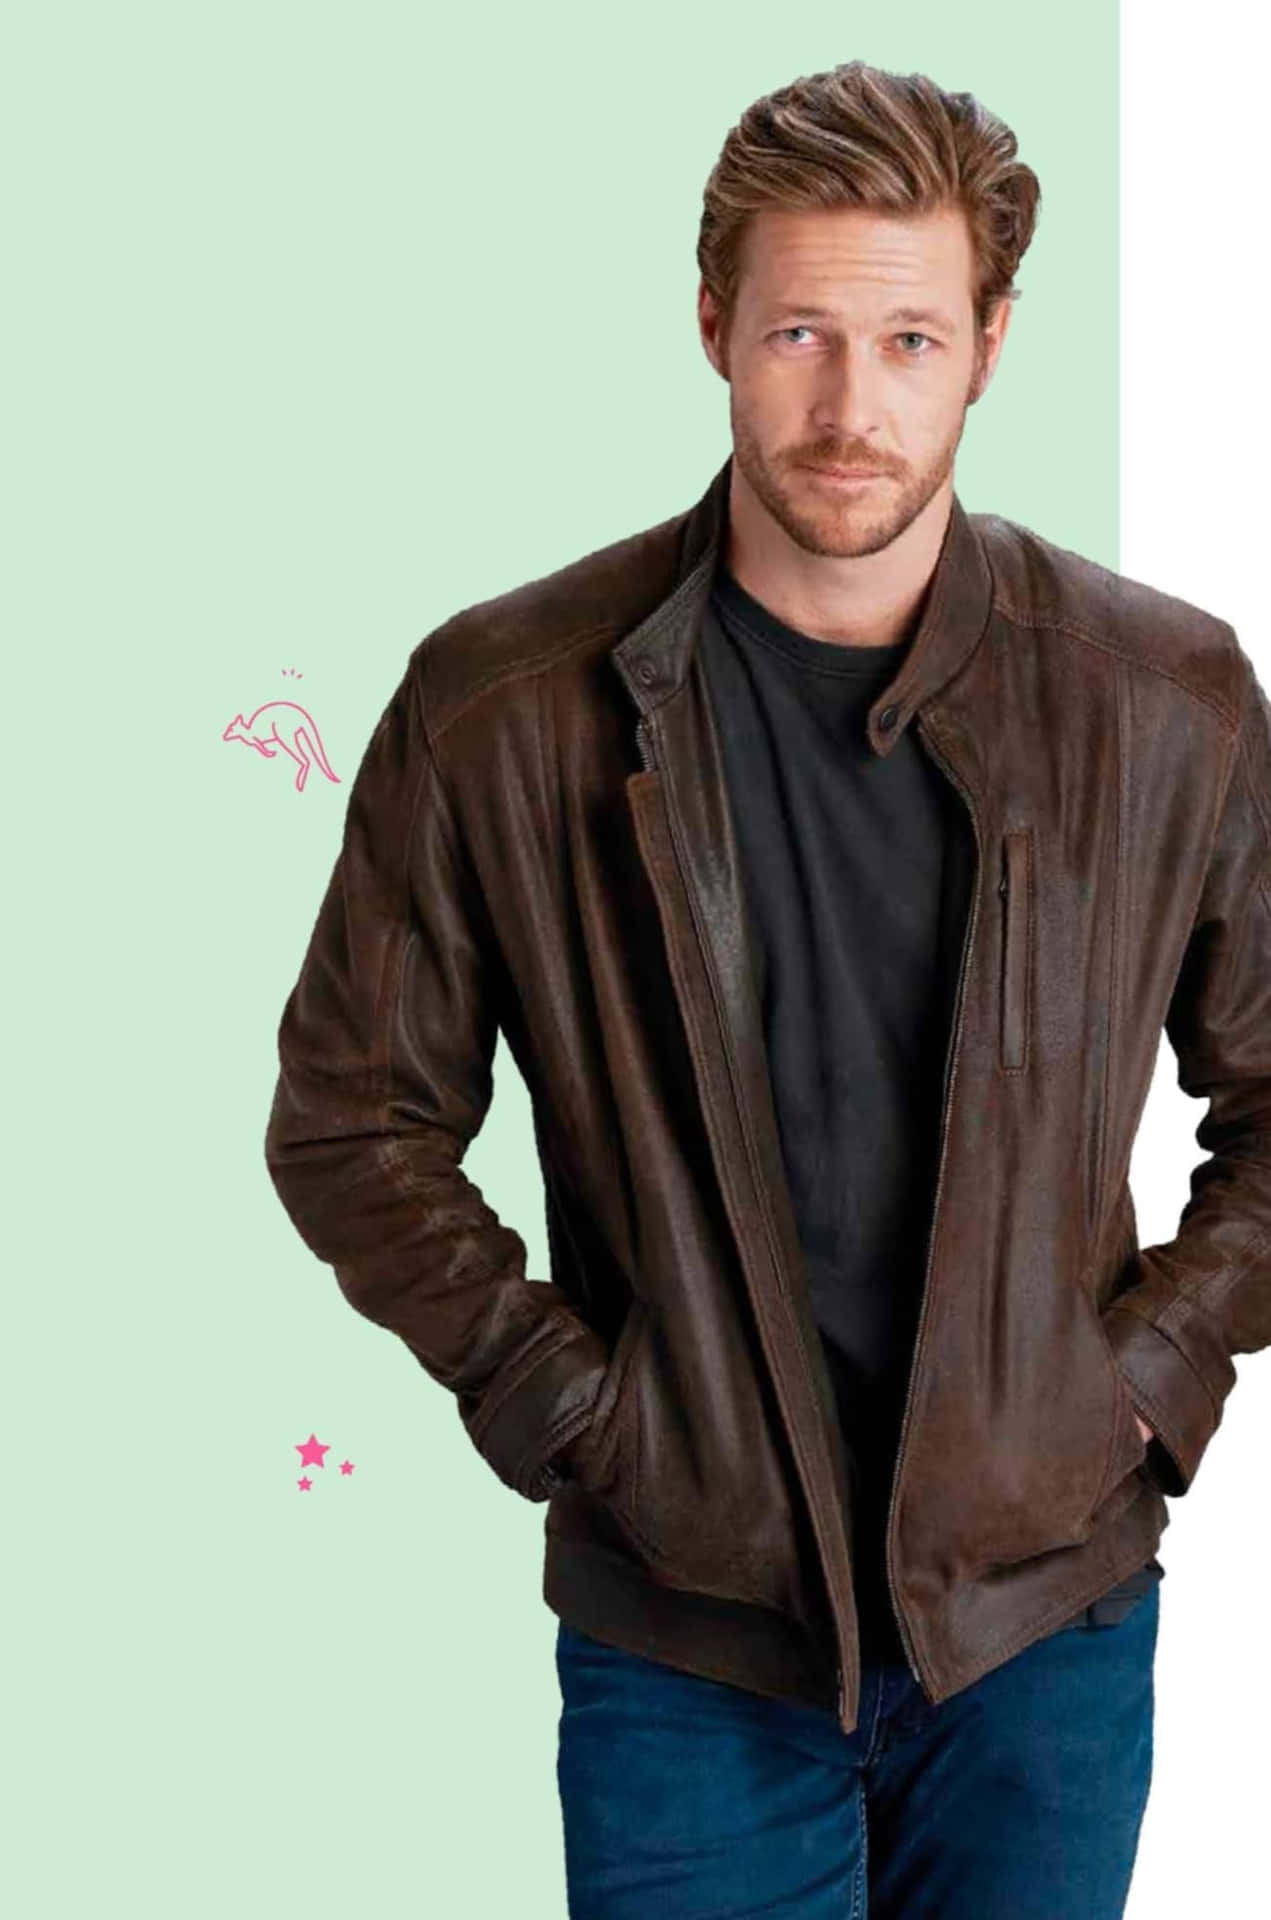 Casual Leather Jacket Man Wallpaper